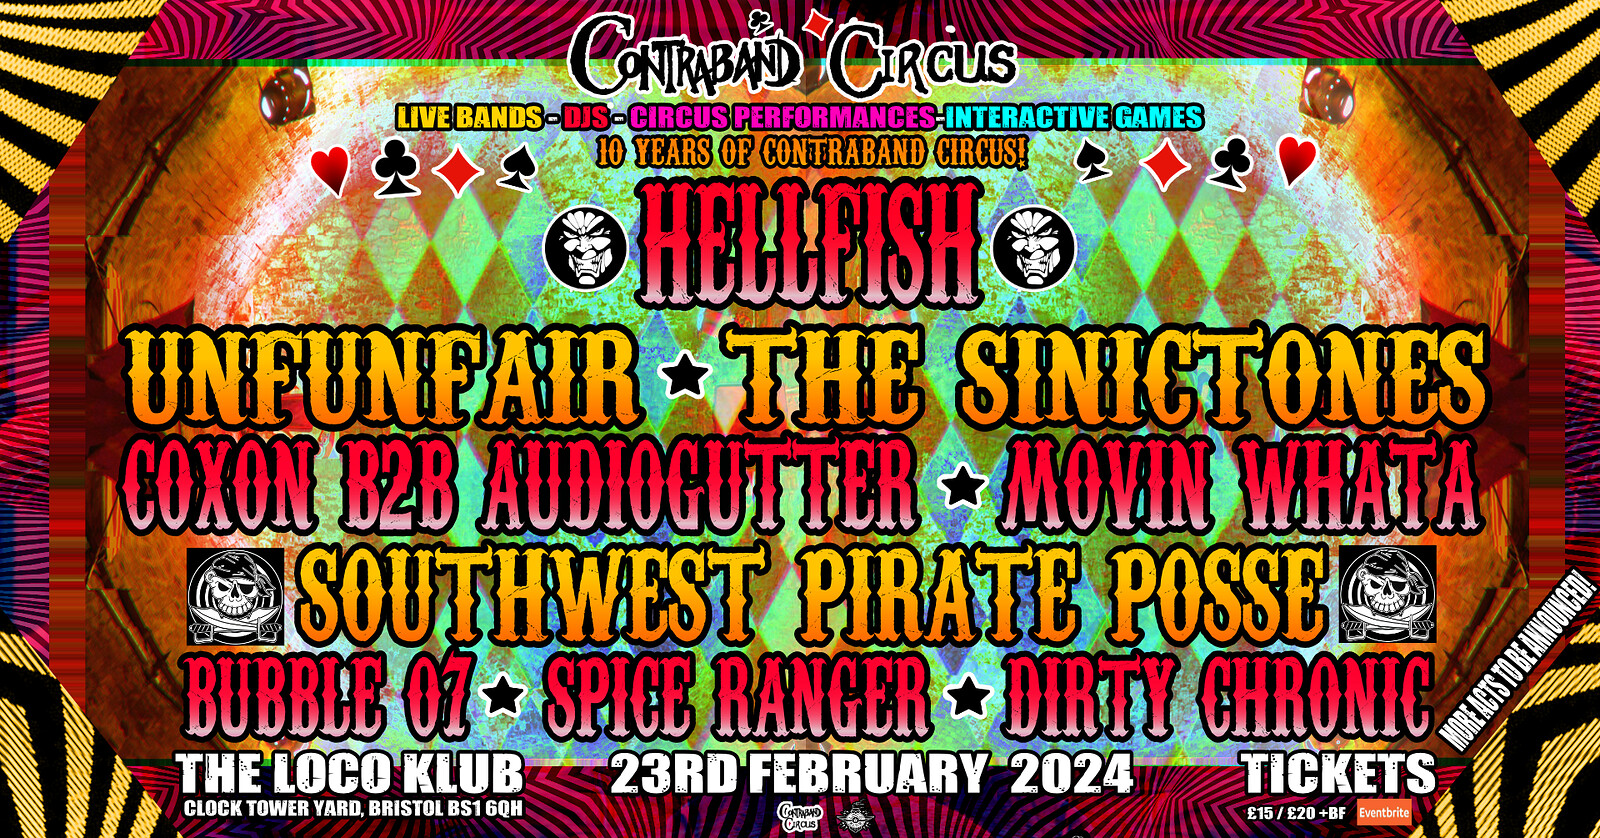 Contraband Circus HELLFISH - The Sinictones at The Loco Klub